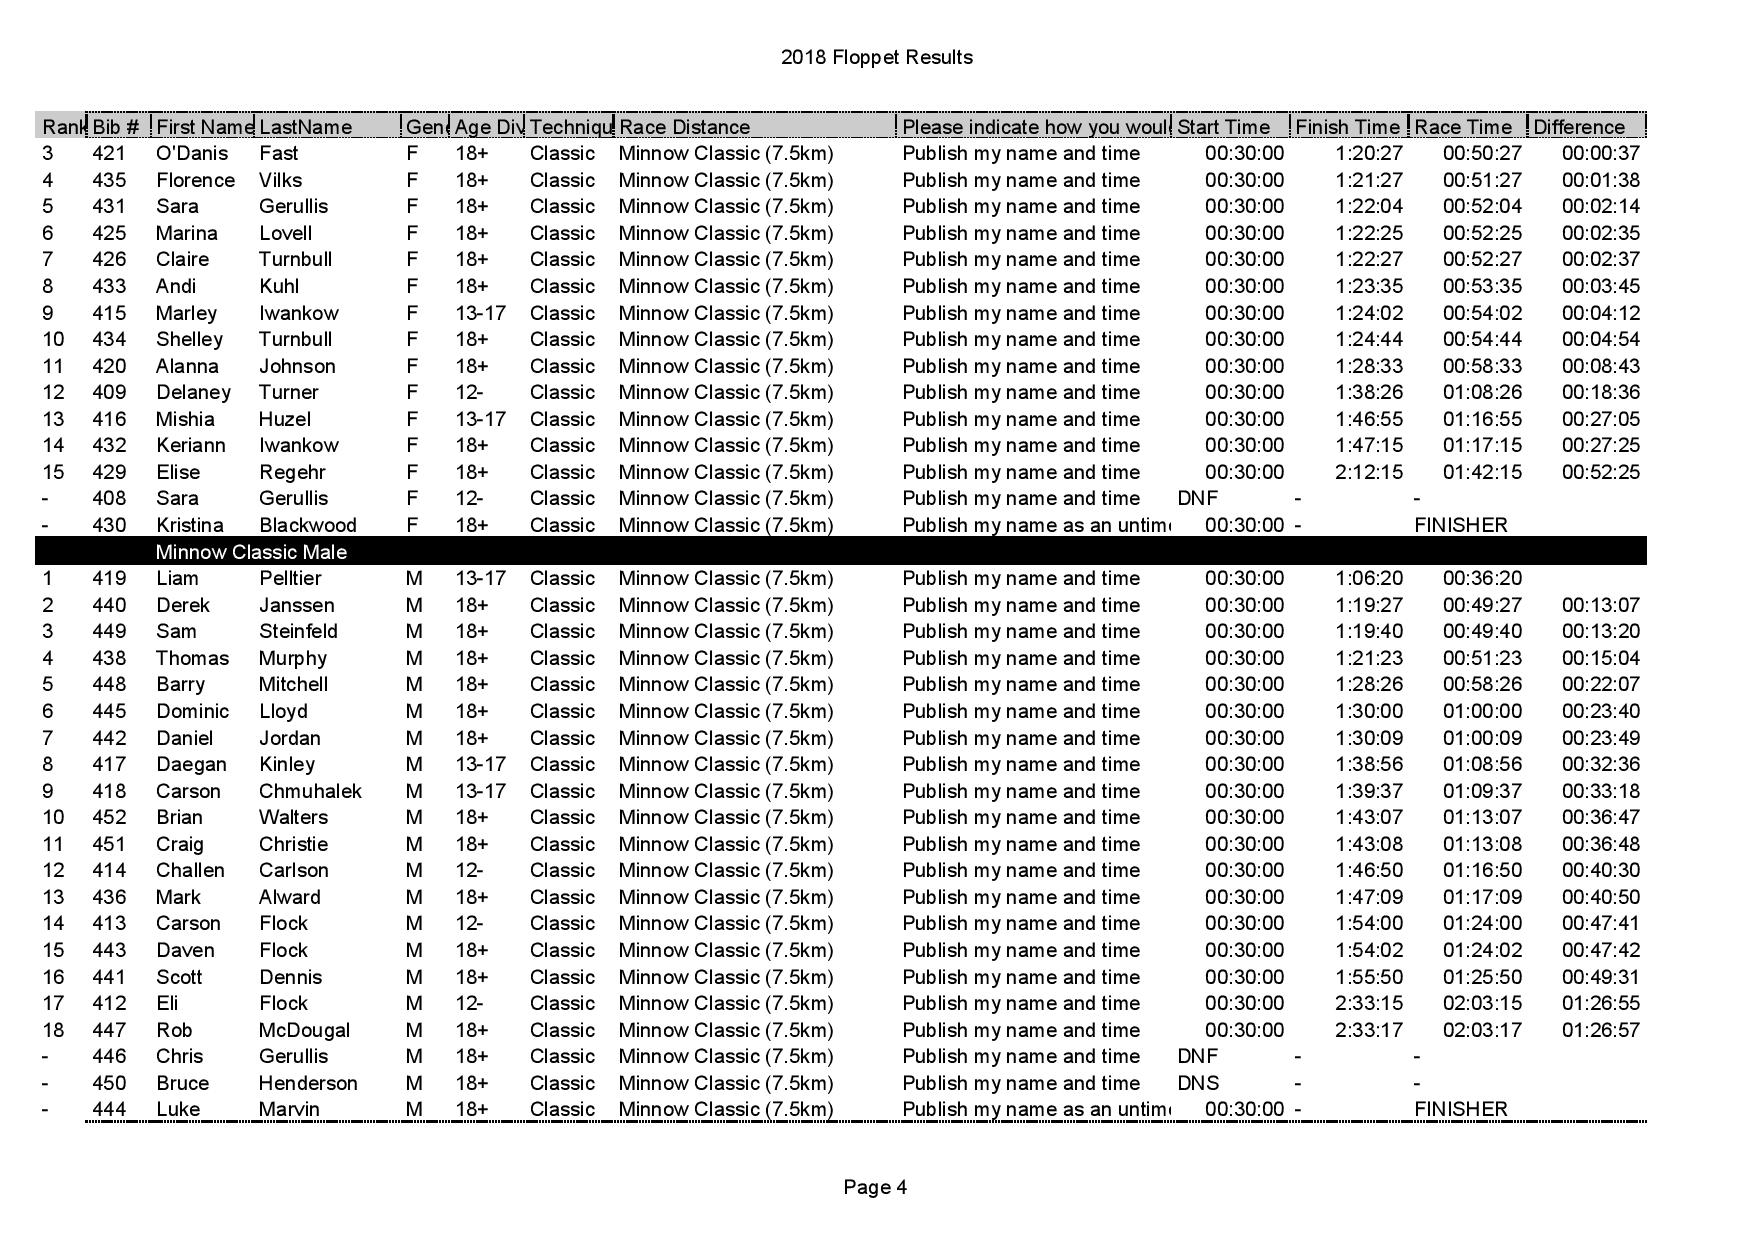 2018 Final Results - 2018 Floppet Results(1)-page-004.jpg